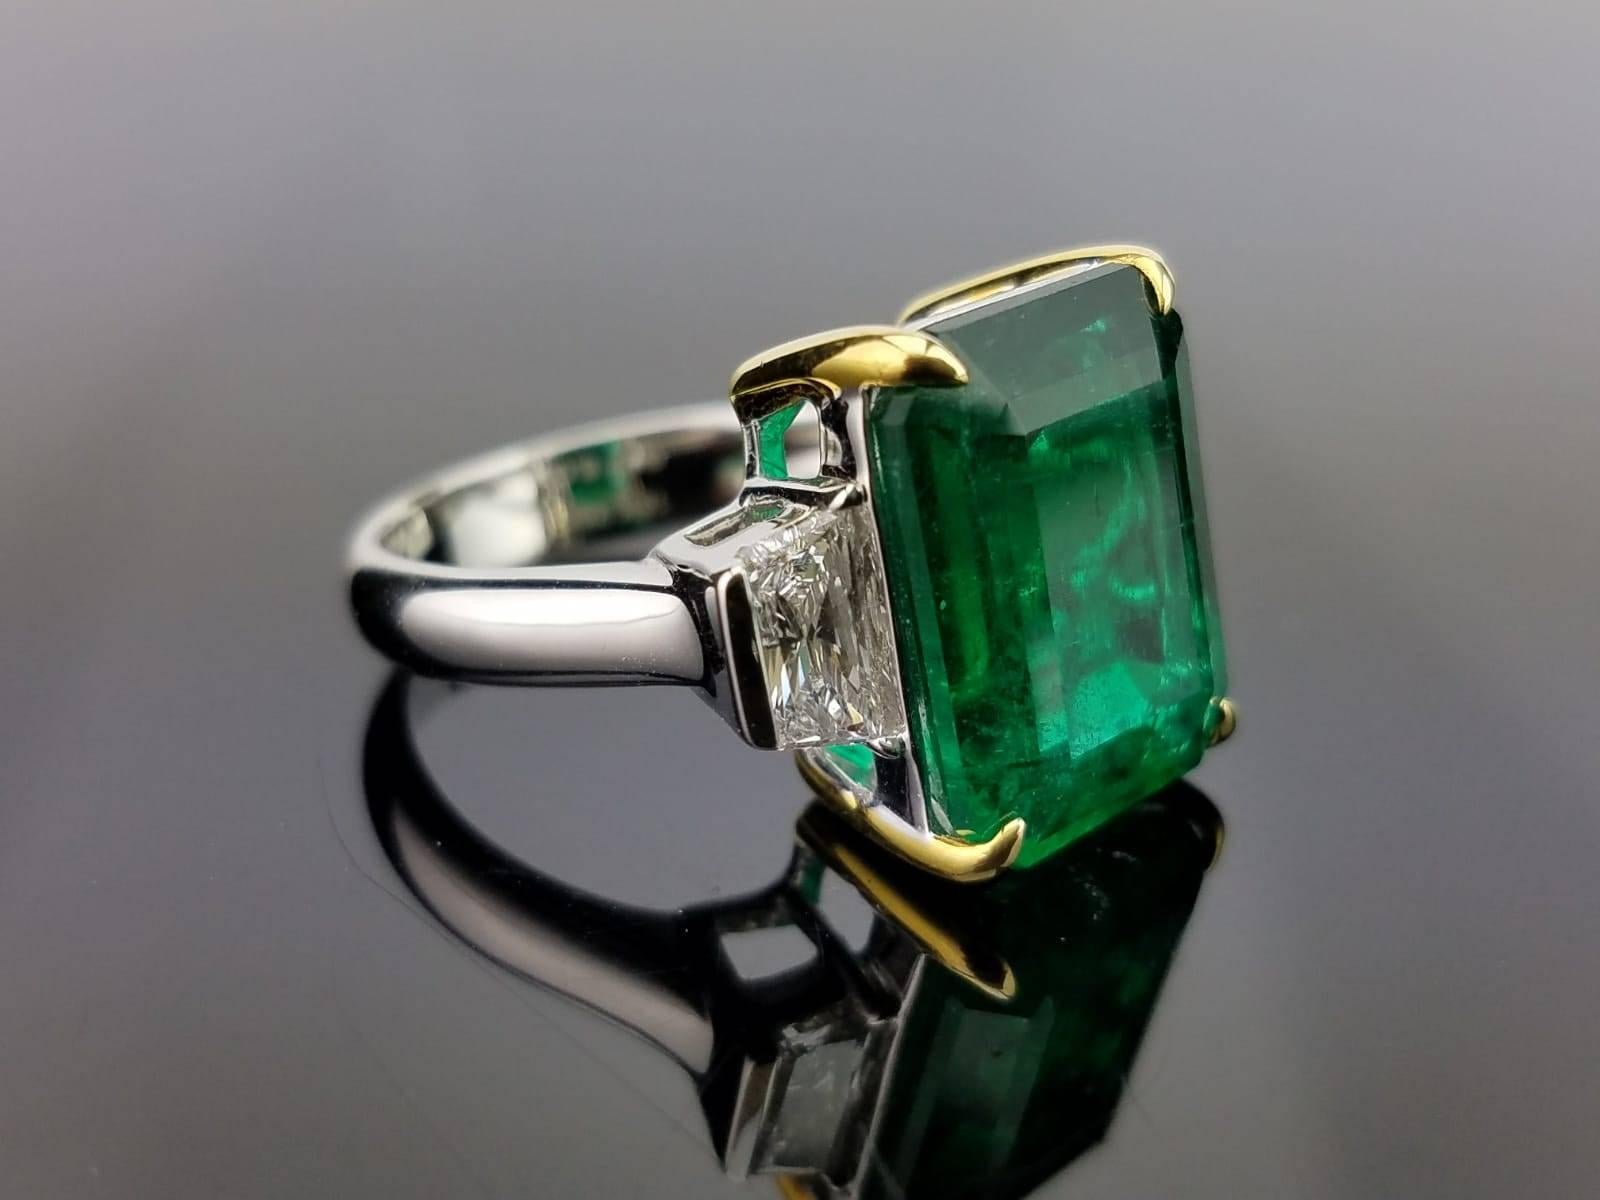 A classic three stone ring, with a 8.01 carat high quality and great colour emerald cut Zambian Emerald centre stone and 2 trapeze 0.77 carat side stone Diamonds. 

Stone Details: 
Stone: Emerald
Carat Weight: 8.01 Carats

Diamond Details: 
Total